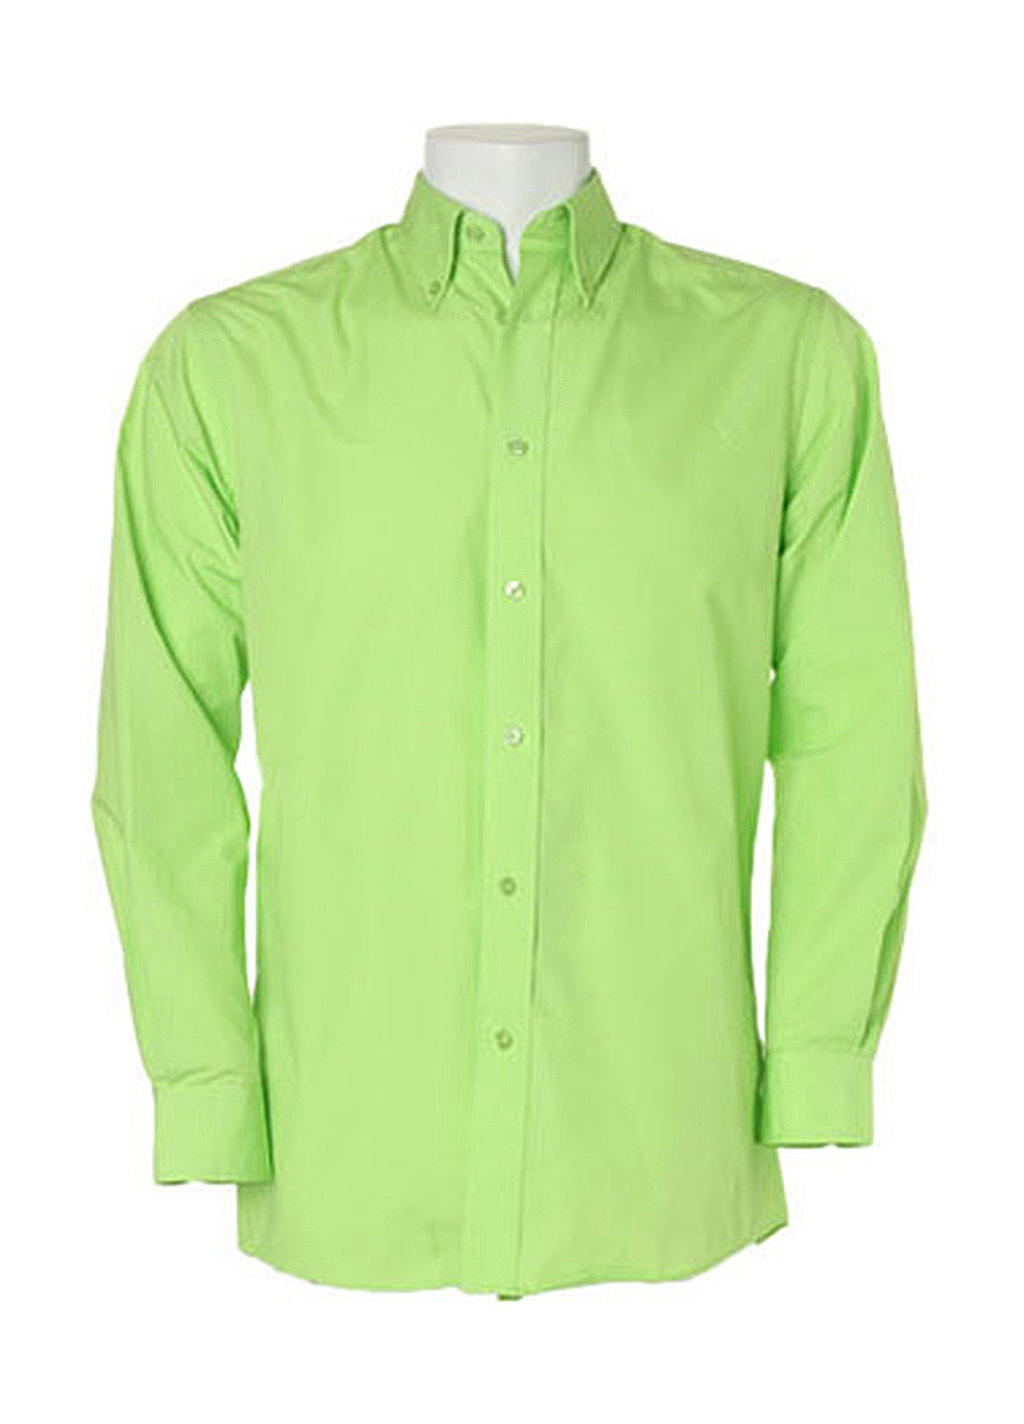  Classic Fit Workforce Shirt in Farbe Lime